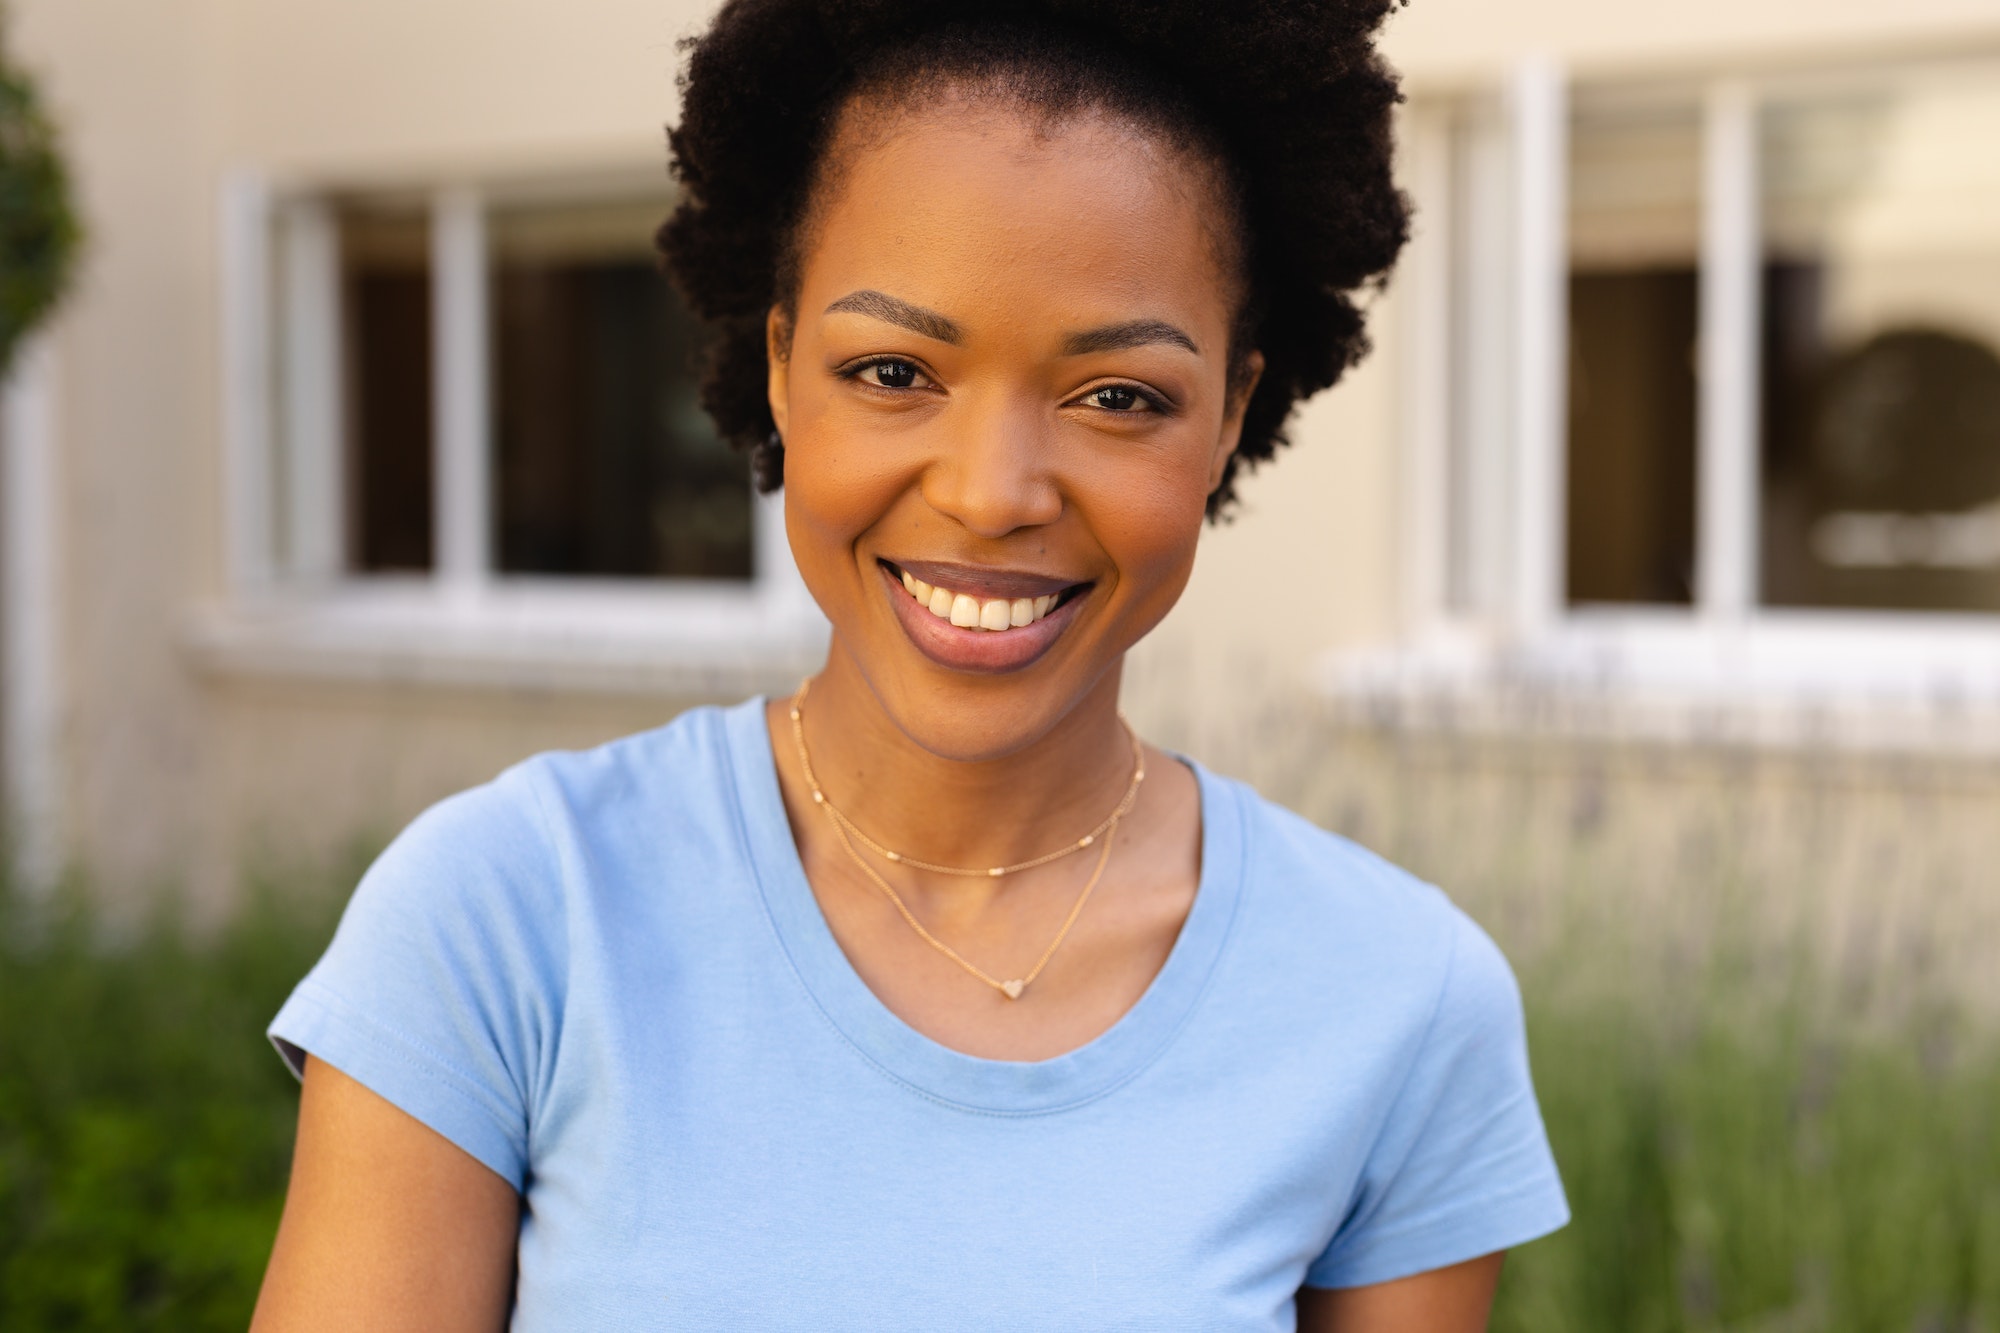 Portrait of smiling african american young woman smiling while standing against house